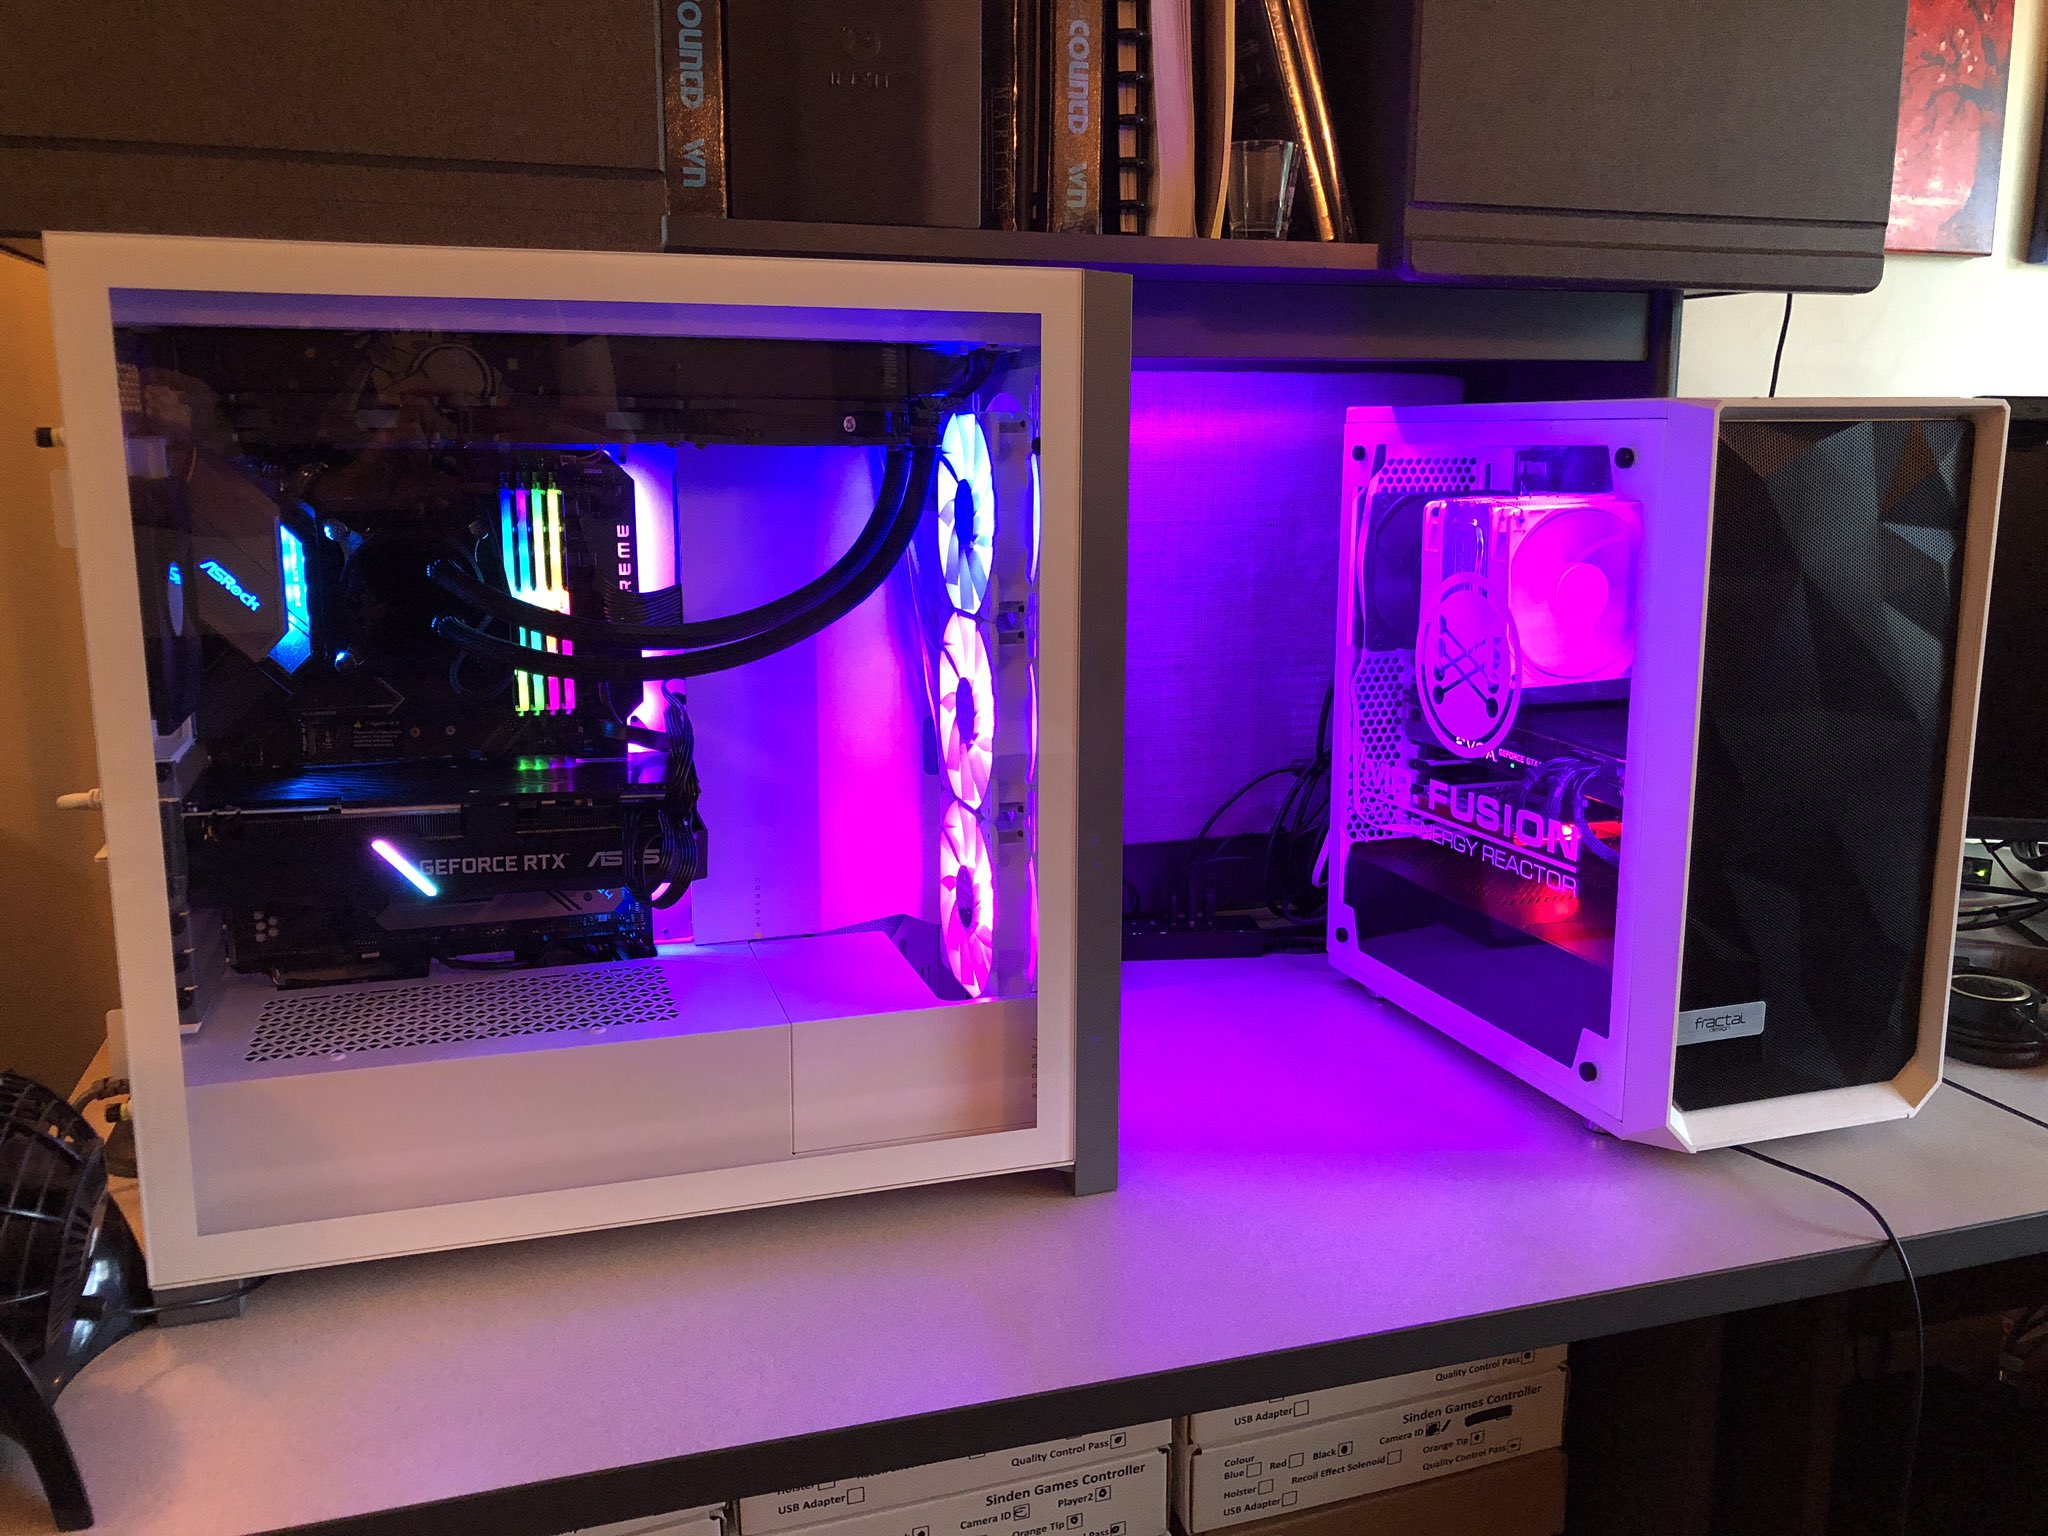 Two rendering machines built specifically for the task of AI. Left Machine: The AI and Machine Learning computer. Right Machine: The editing and project machine. Lots of RGB lights, because they look cool.